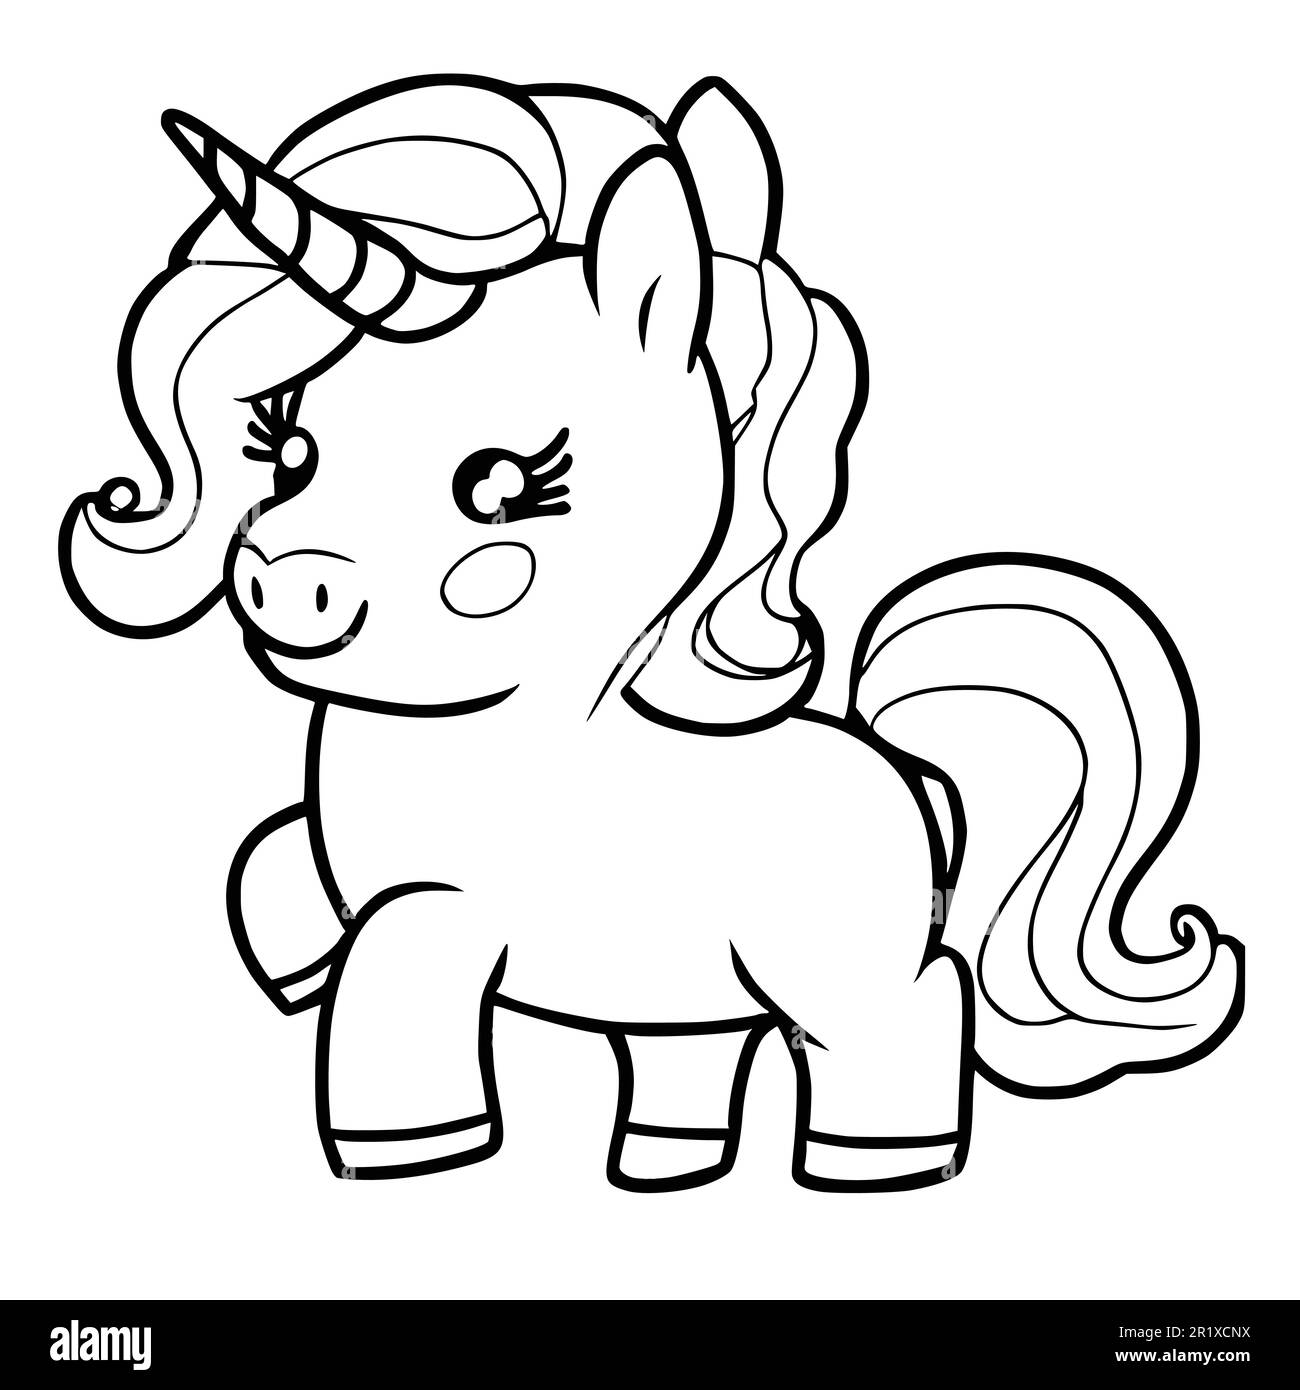 Cute Unicorn Coloring Pages for Kids Stock Vector